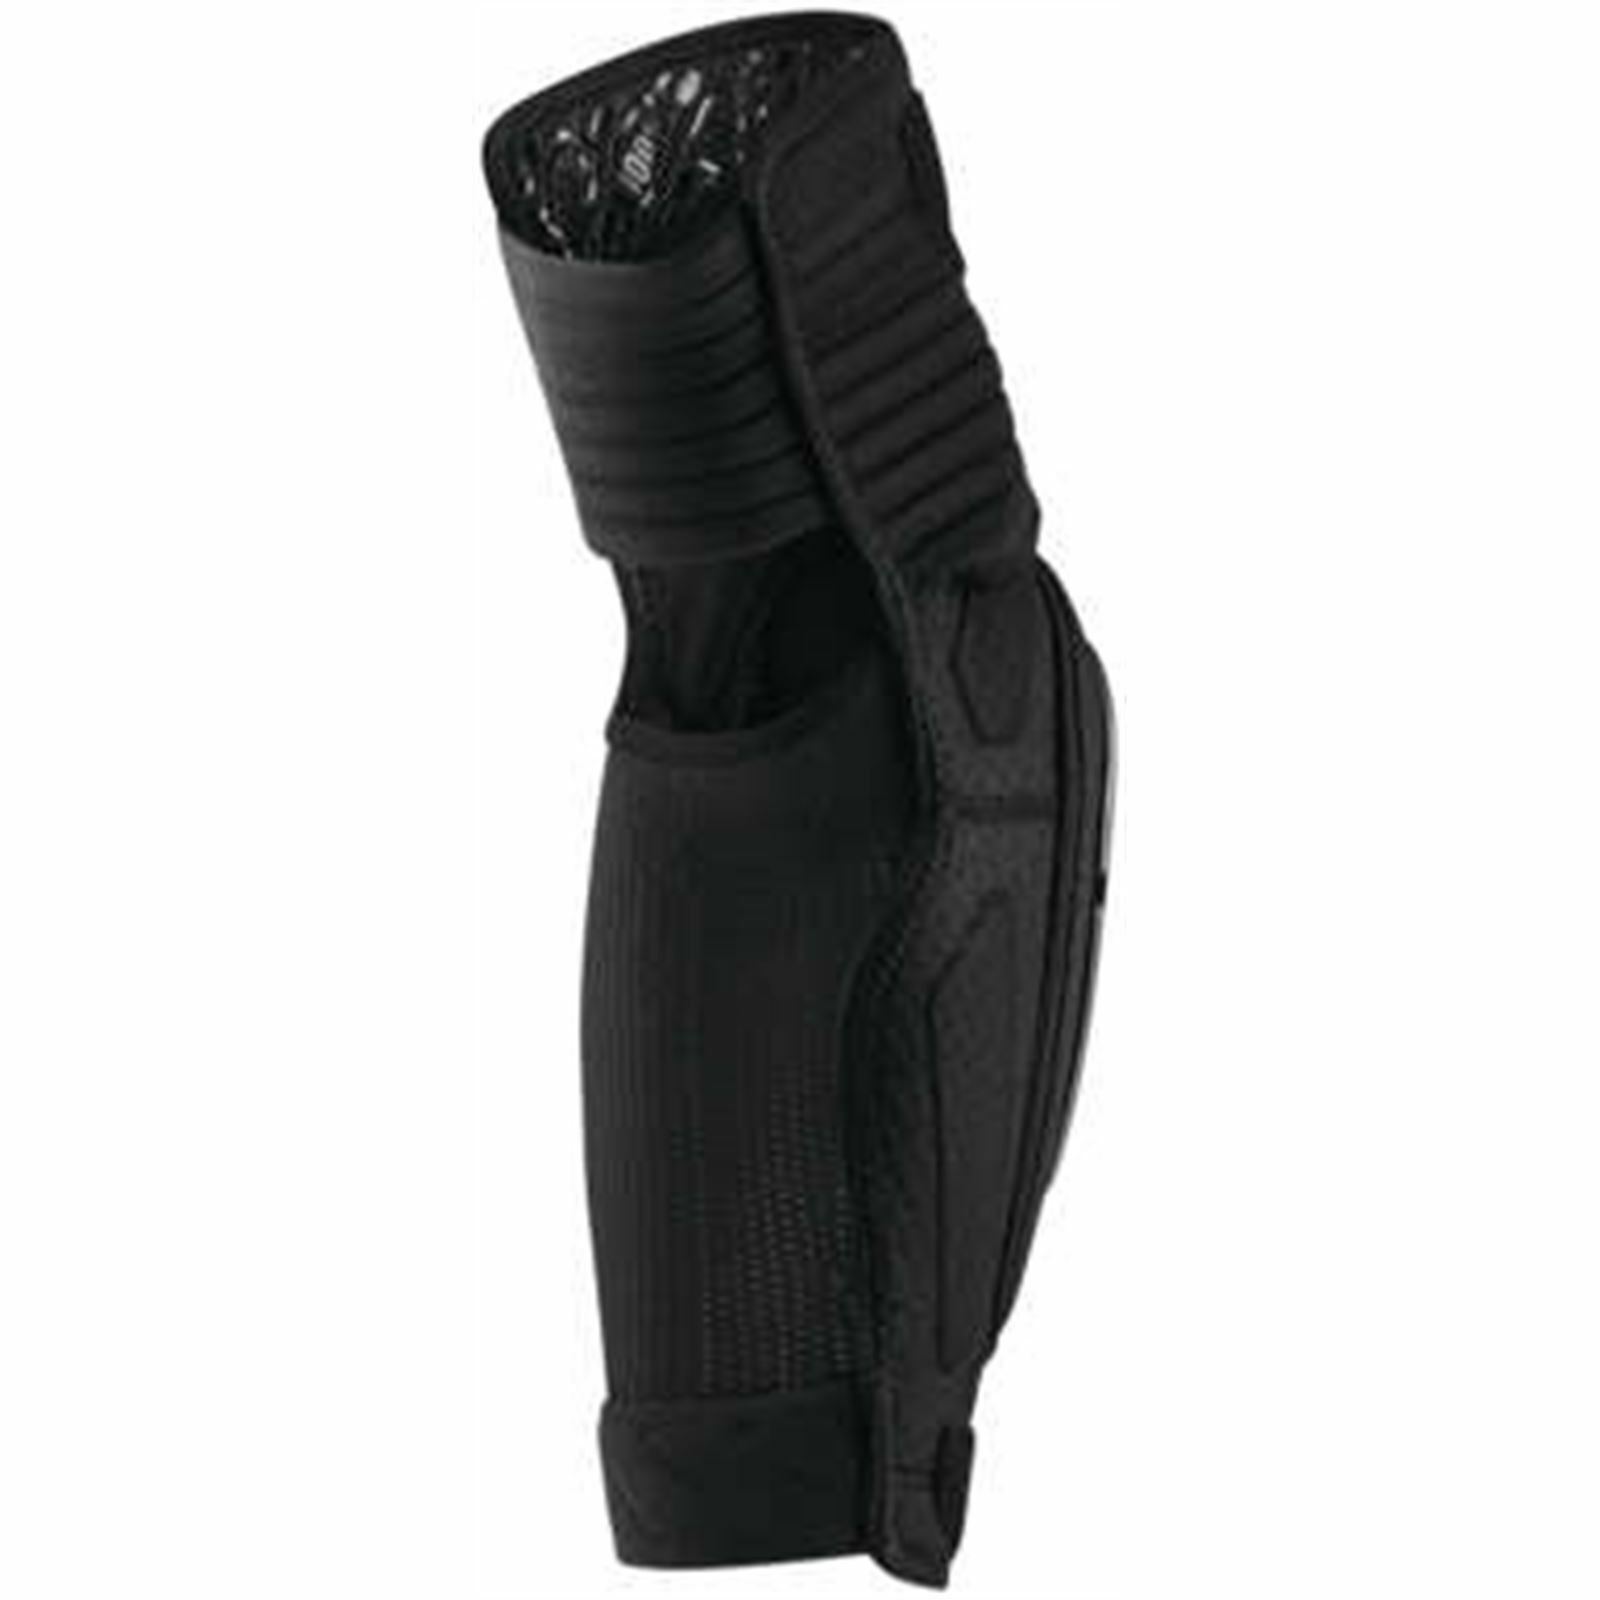 100% Fortis Elbow Guard Blk Sm/Md - Click Image to Close